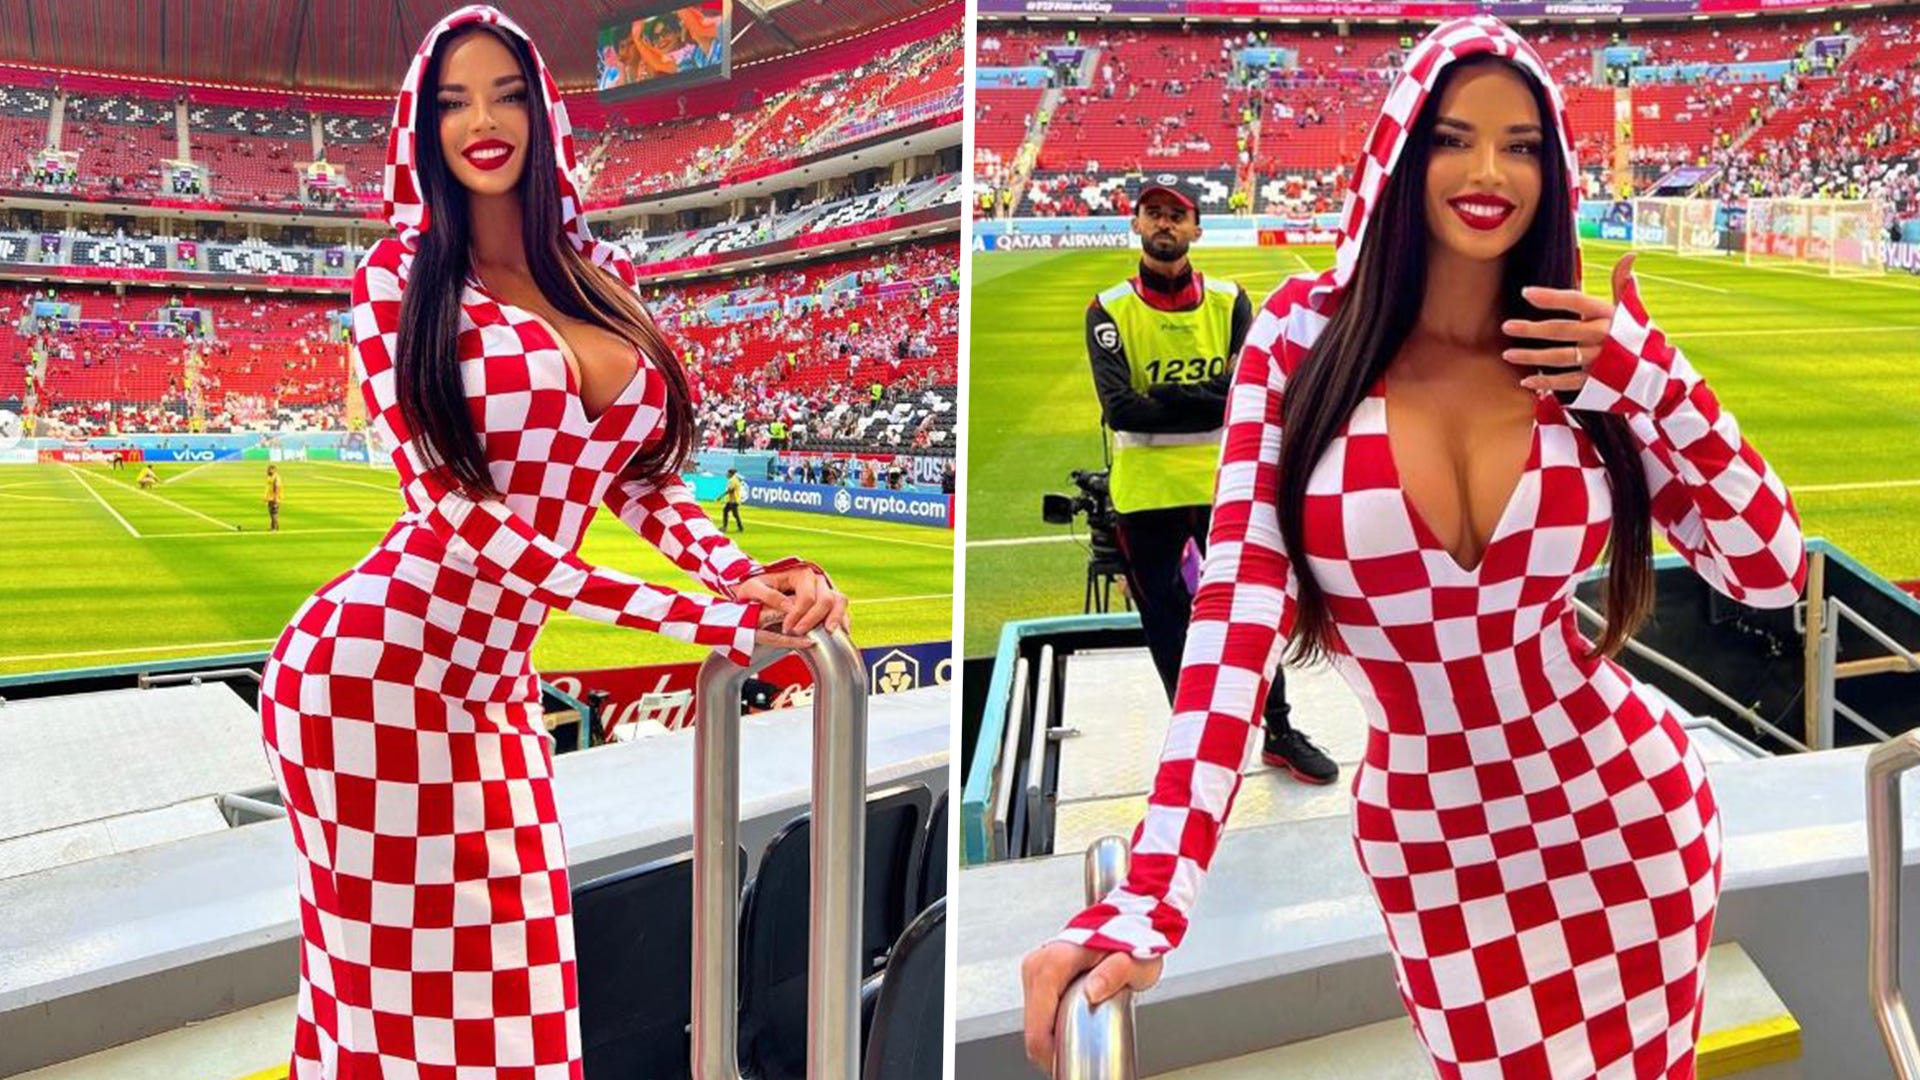 Croatian Instagram model Ivana Knoll risks breaking Qatar decency laws &  causing huge offence for wearing racy World Cup outfits | Goal.com US